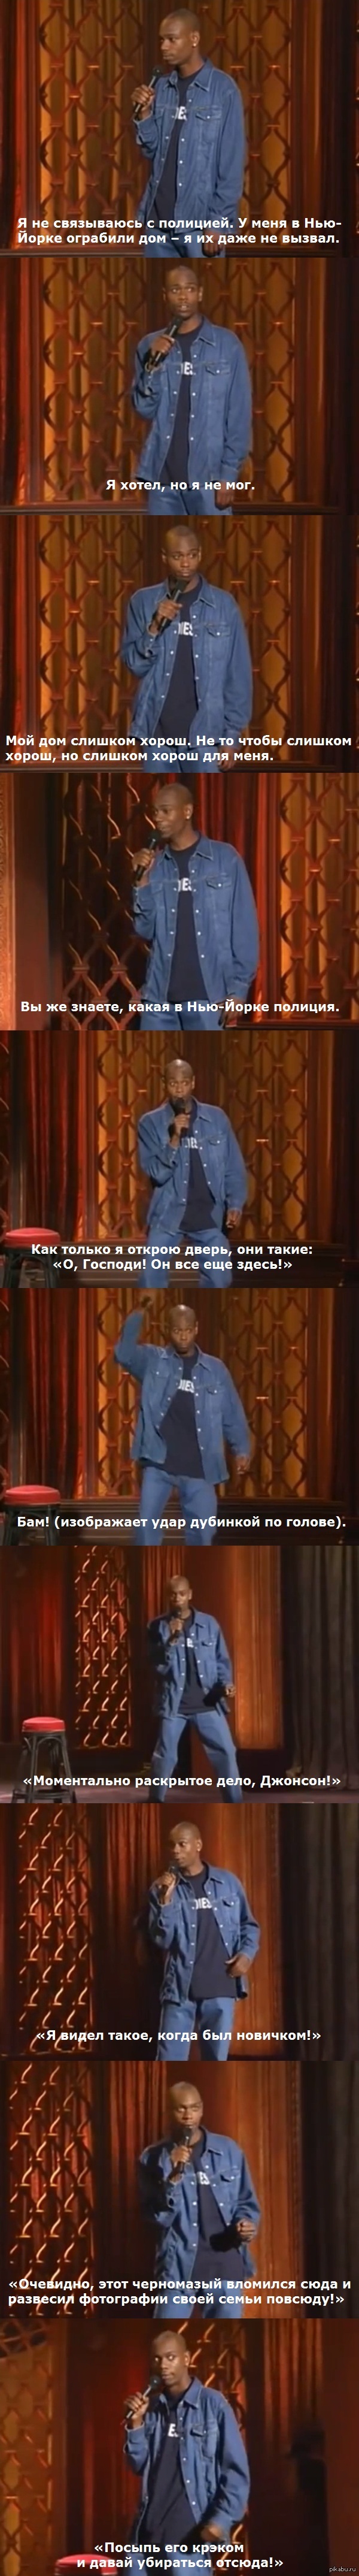     (stand-up).      HBO Comedy Half Hour.